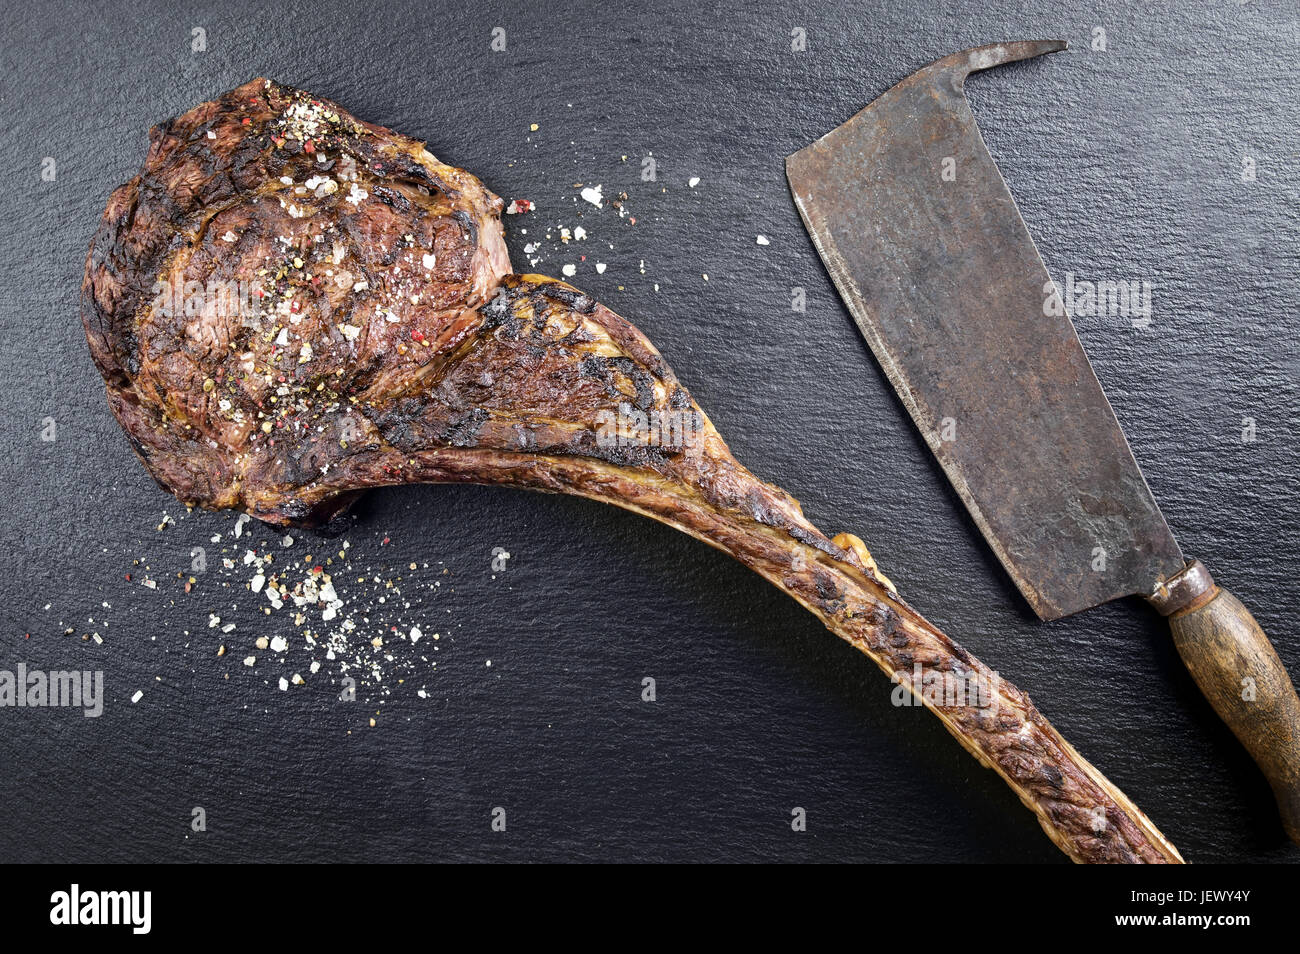 Dry Aged Barbecue Tomahawk Steak Stock Photo